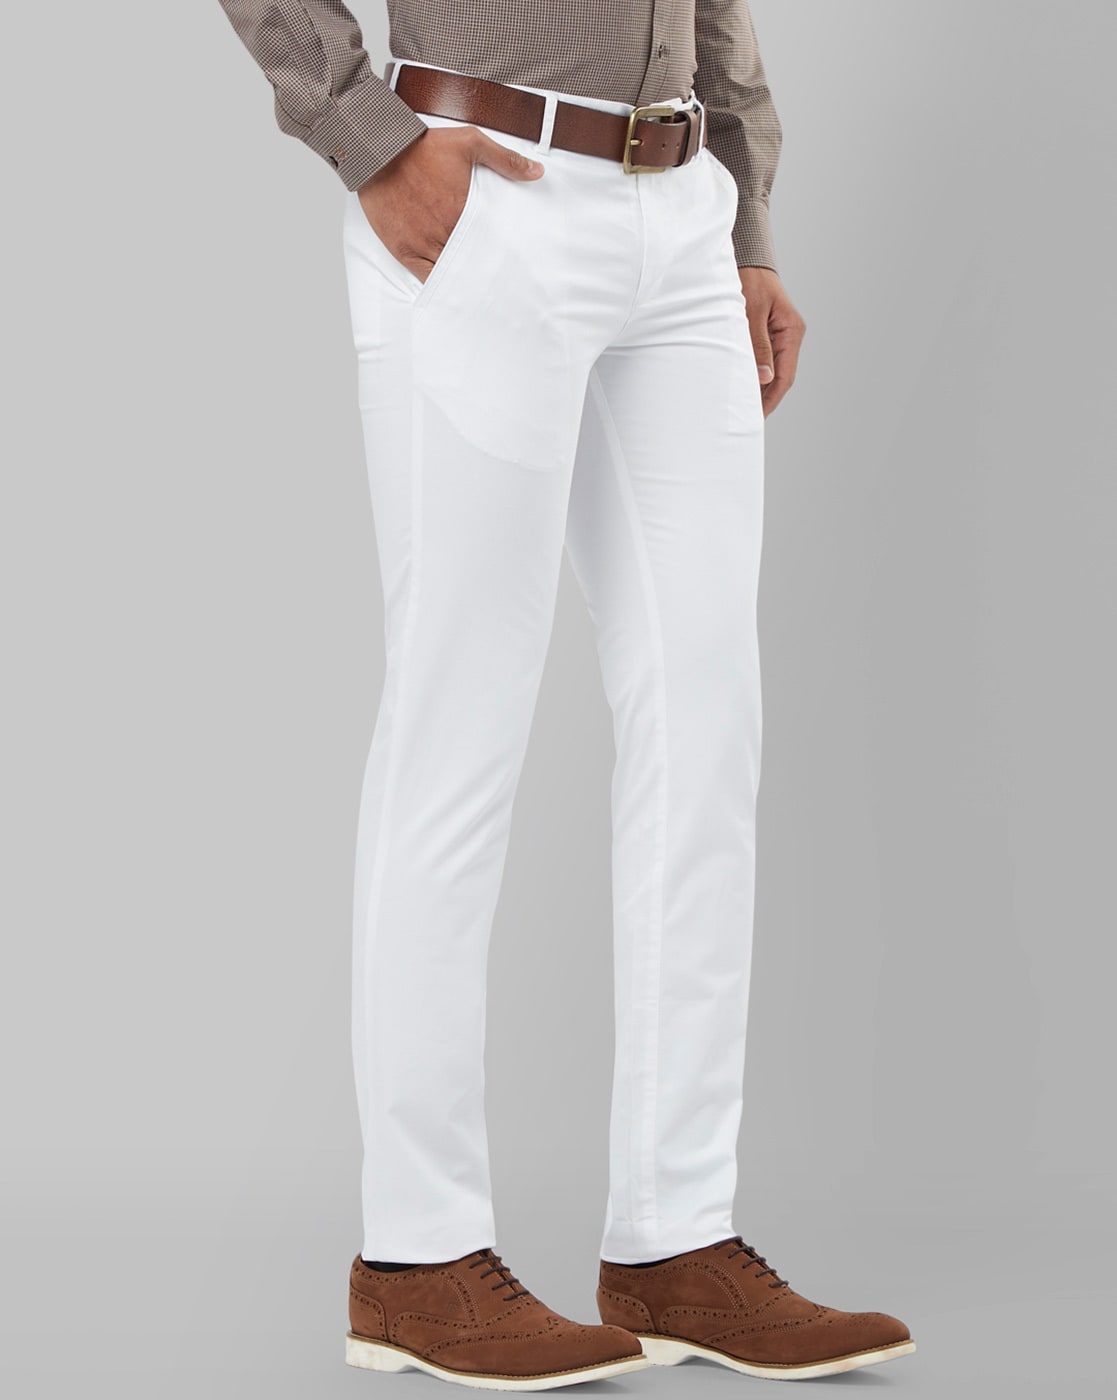 Kadls Cotton Mens White Formal Pant, Pattern : Plain, Waist Size : 28-40 at  Rs 325 / Piece in Kanpur